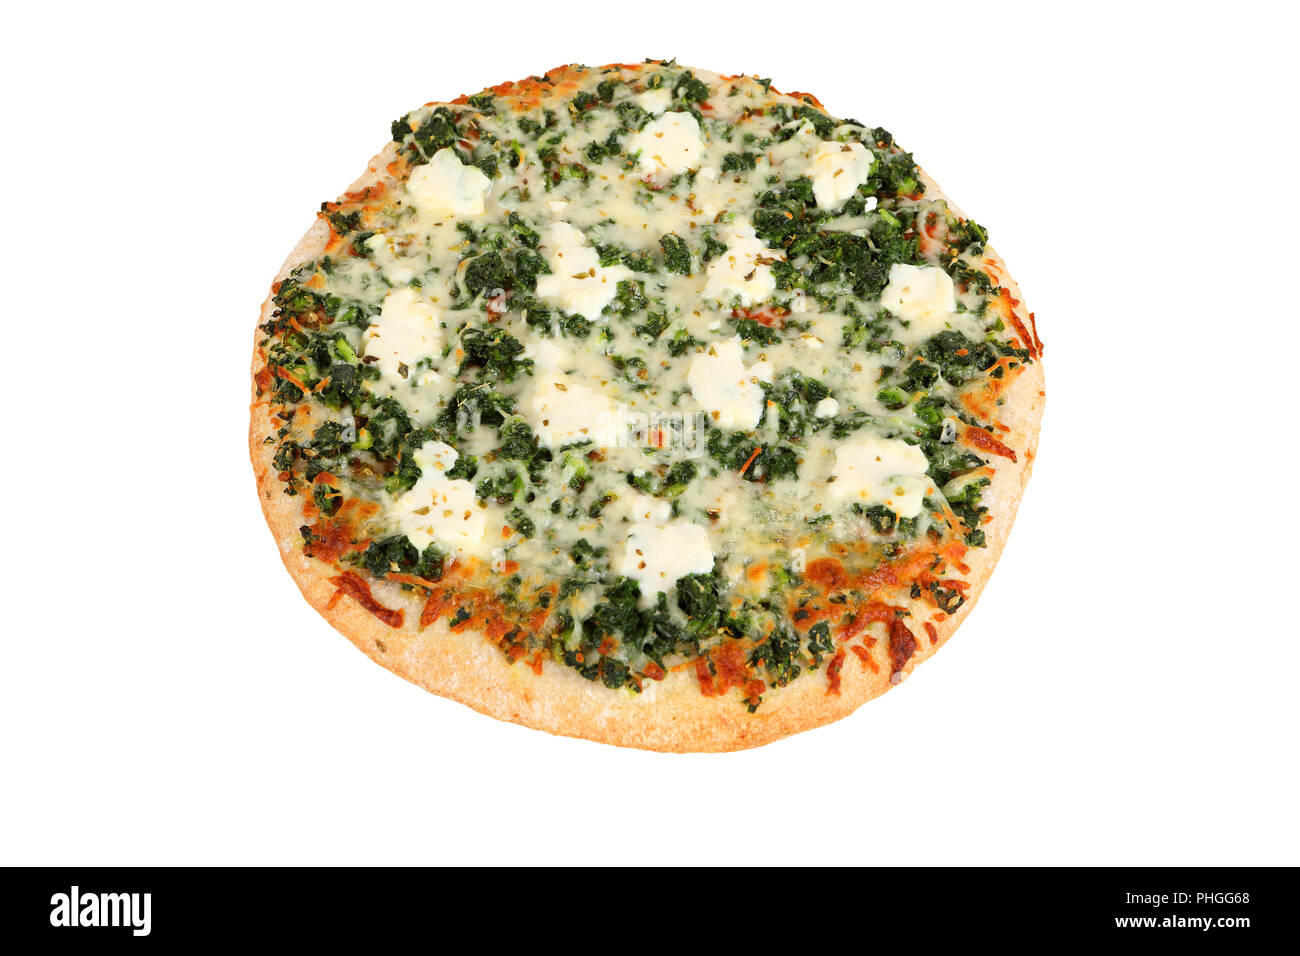 pizza with spinach Stock Photo